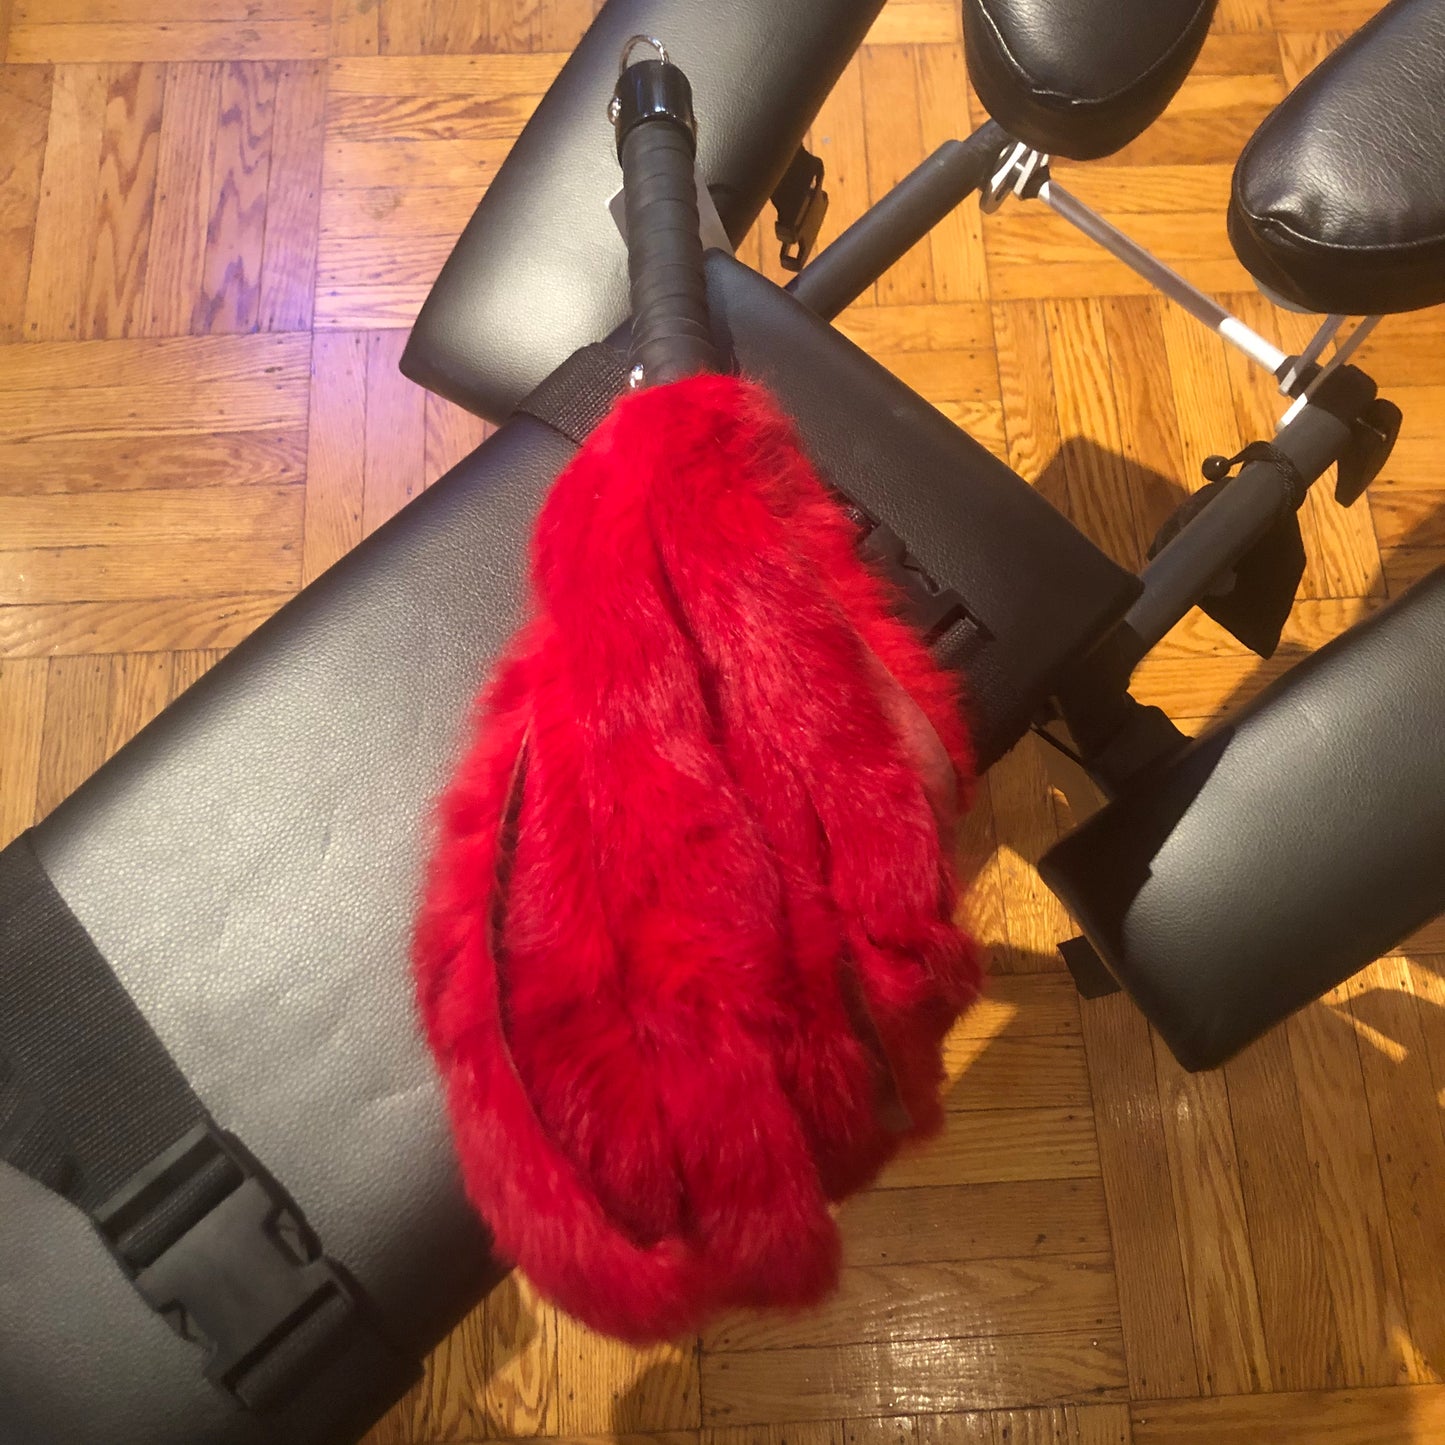 Red 20" rabbit fur flogger with black leather handle and D-ring for hanging, laying on a spanking bench.